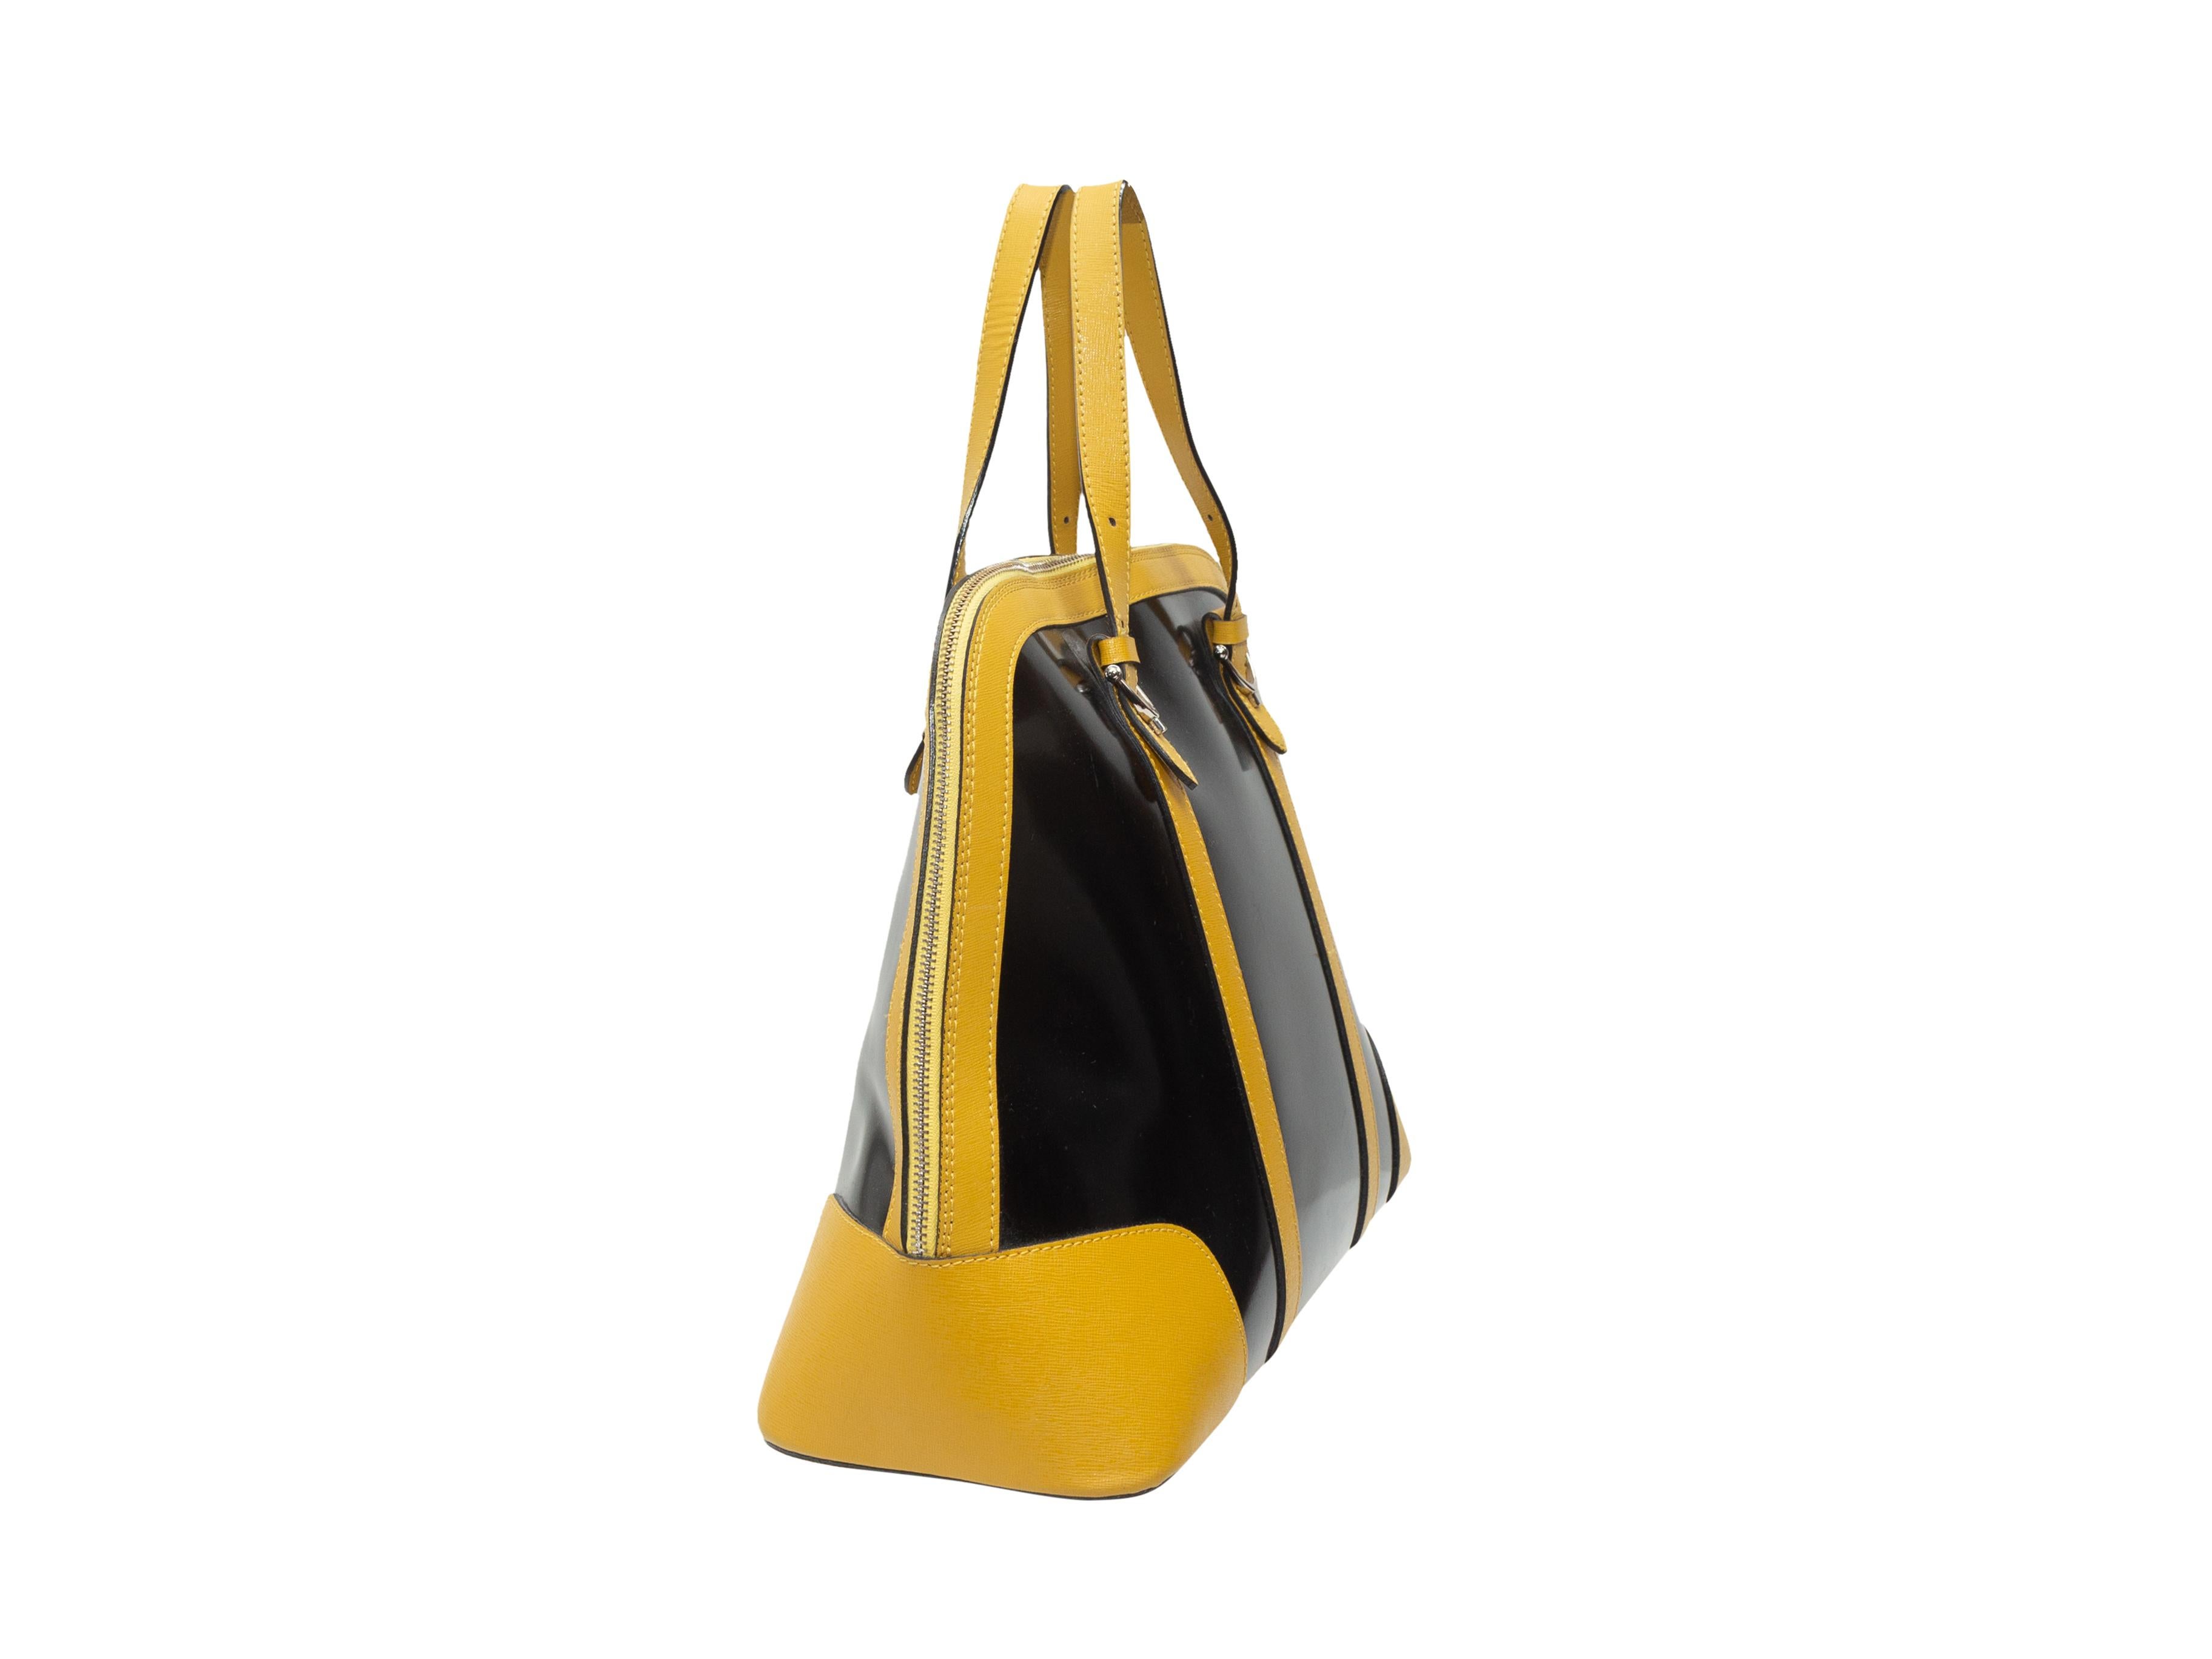 Product details: Black and yellow leather handbag by Pulicati. Silver-tone hardware. Interior zip pocket. Dual top handles featuring buckle accents. Zip closure at top. 15